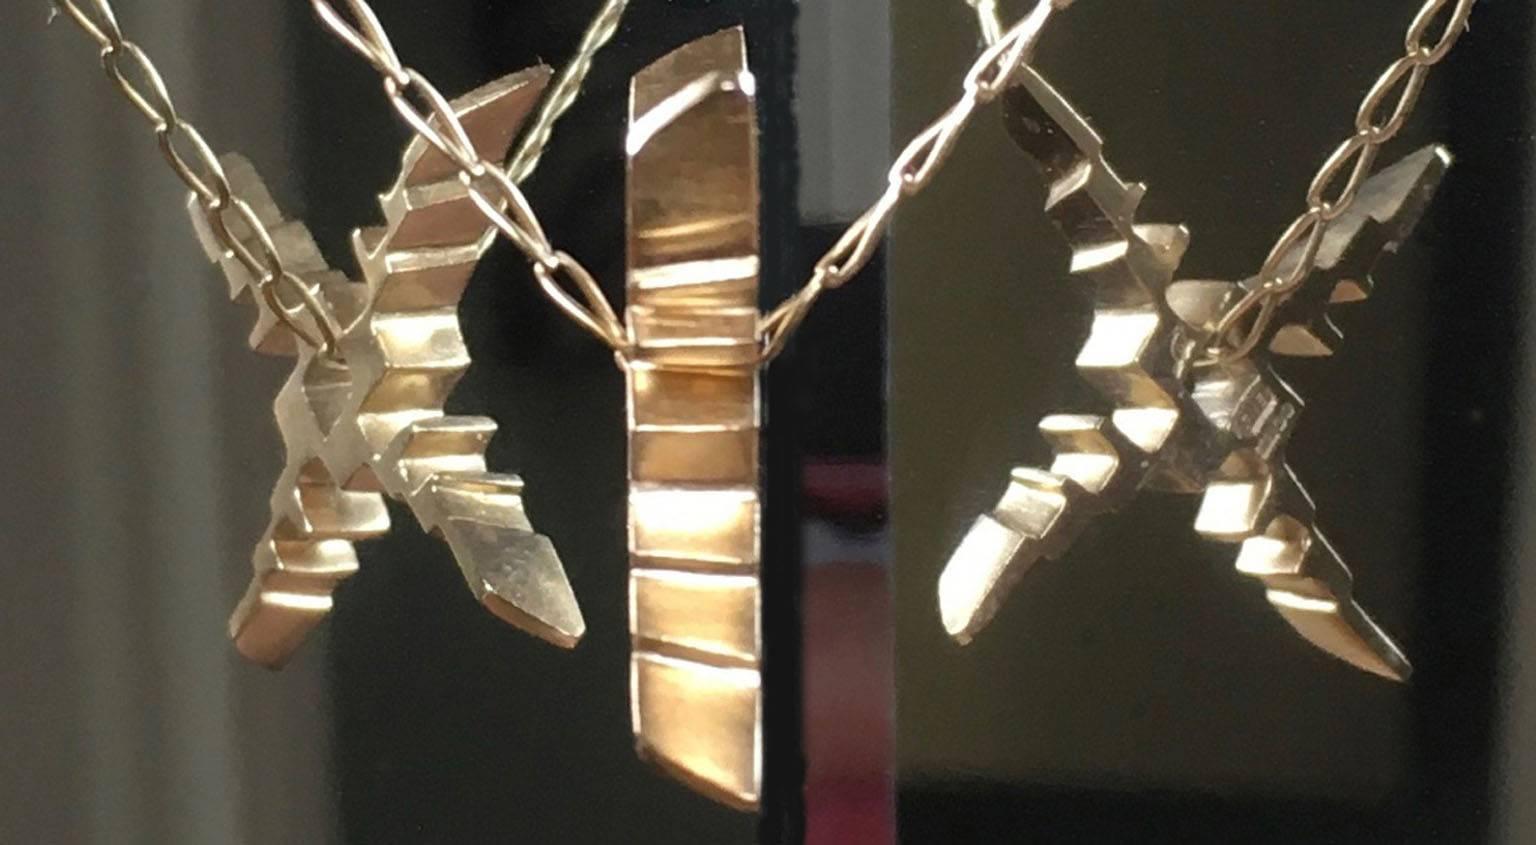 Detailed and angular, this solid gold pendant boasts 4 sides of architectural beauty. Sometimes viewed as a Japanese Shuriken weapon and other times mistaken for a contemporary St Brigid's Cross, the nuance of meaning is half its charm! Free